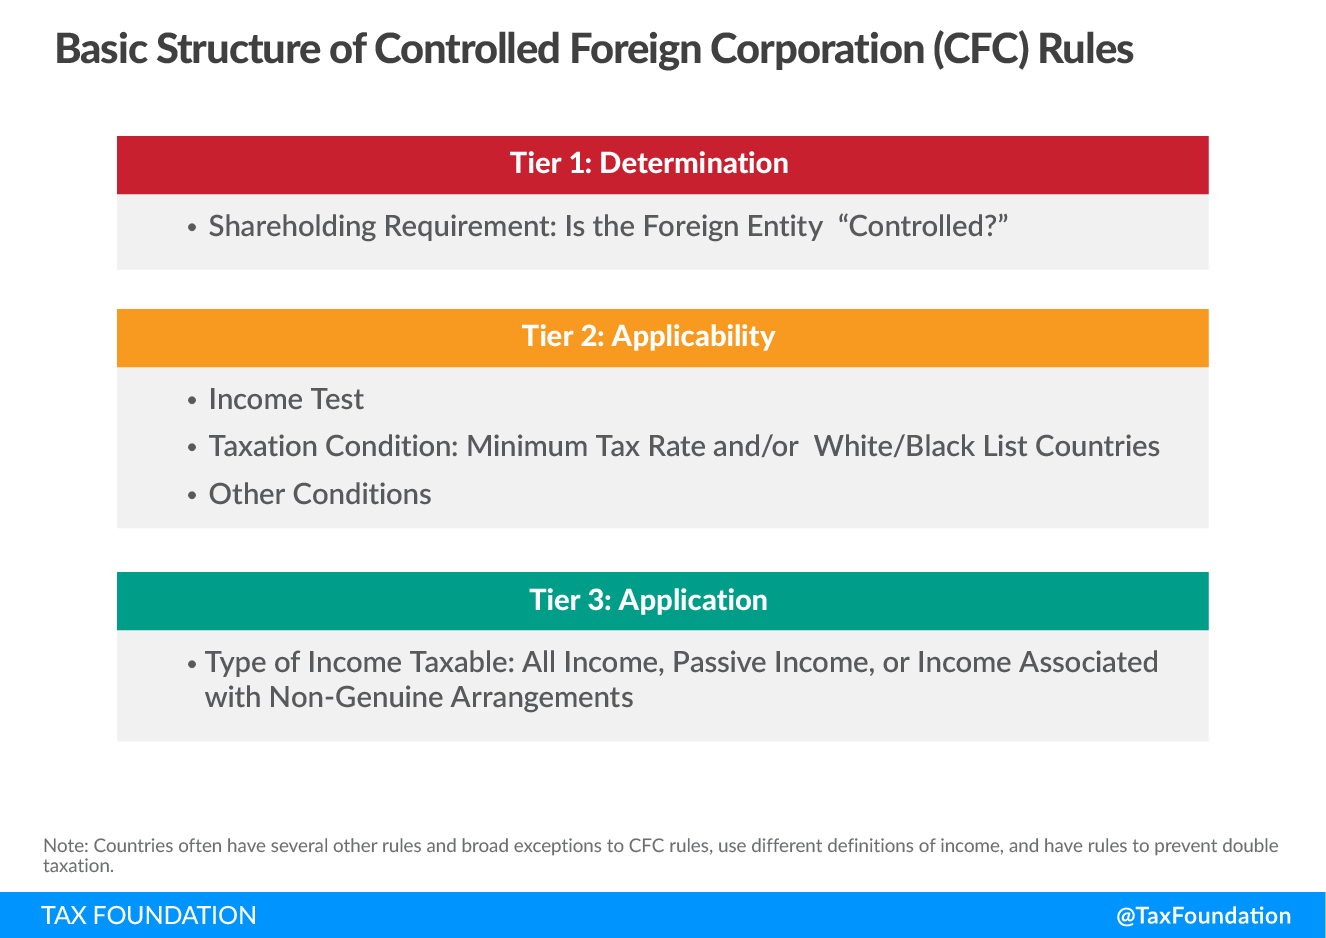 Controlled Foreign Corporation Rules or CFC rules structure. Anti-Base Erosion Provisions and Territorial Tax Systems in OECD Countries (2)